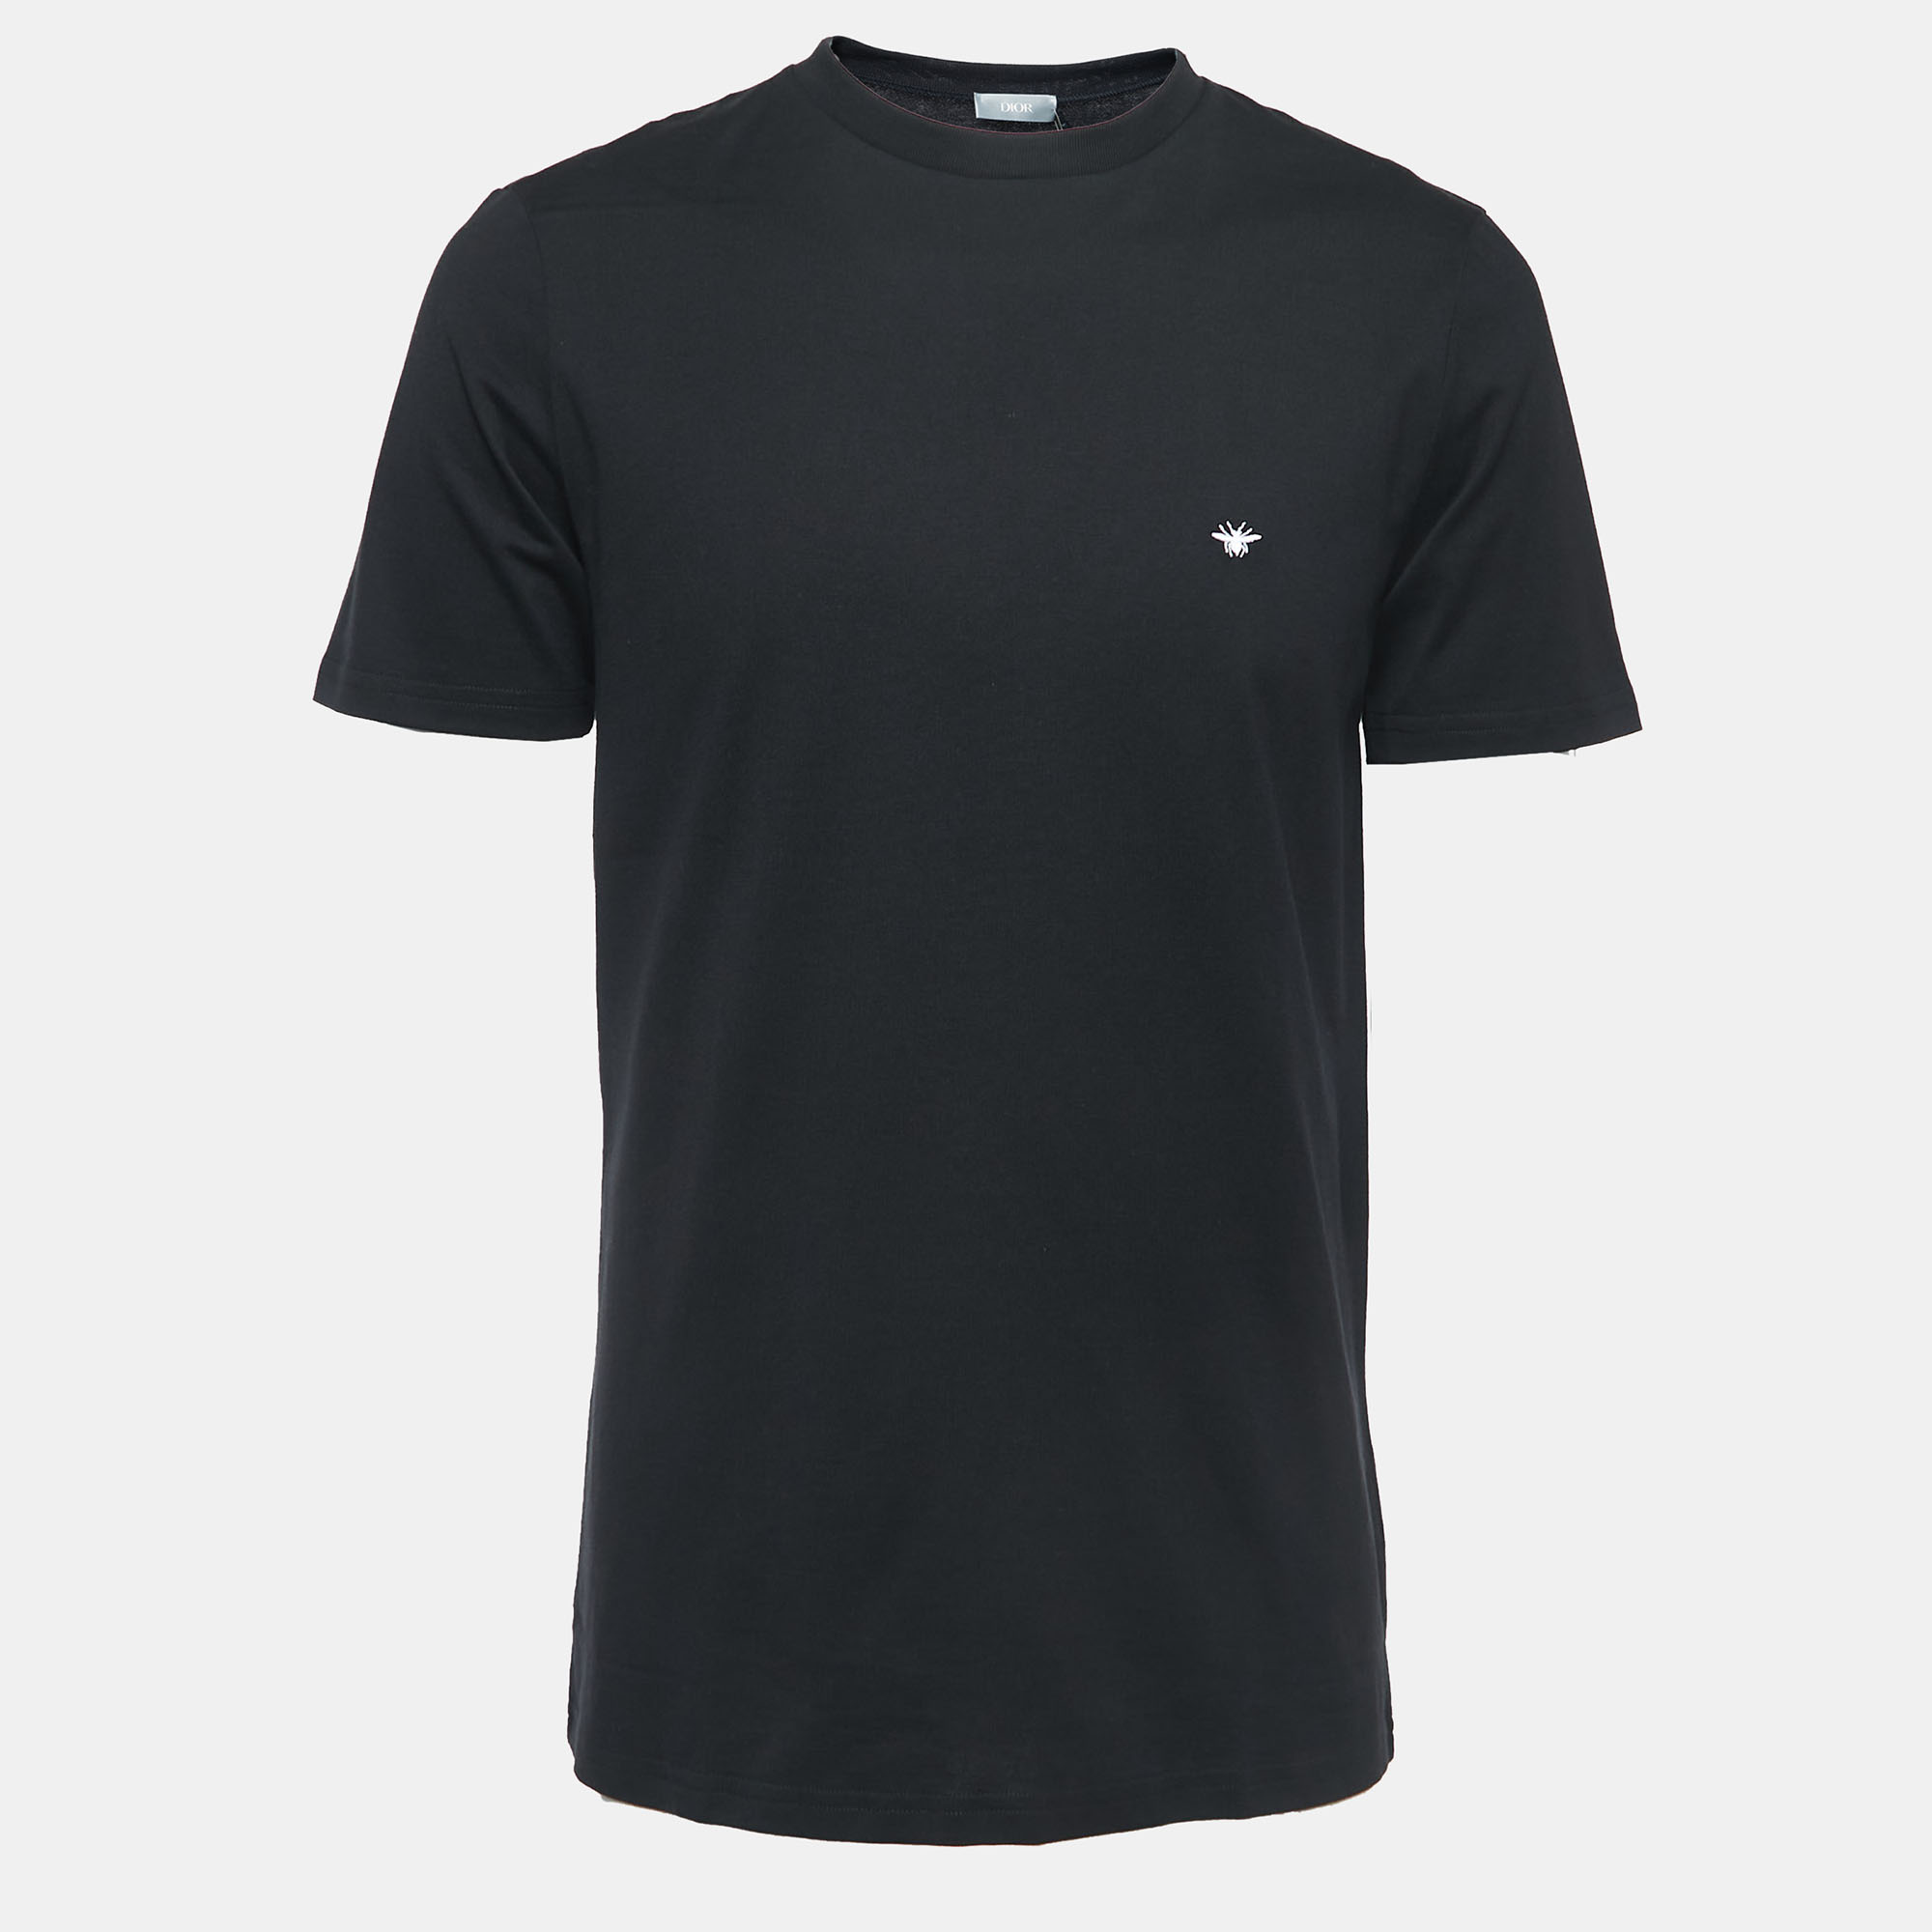 Dior Homme Black Bee Embroidered Cotton Crew Neck T-Shirt S